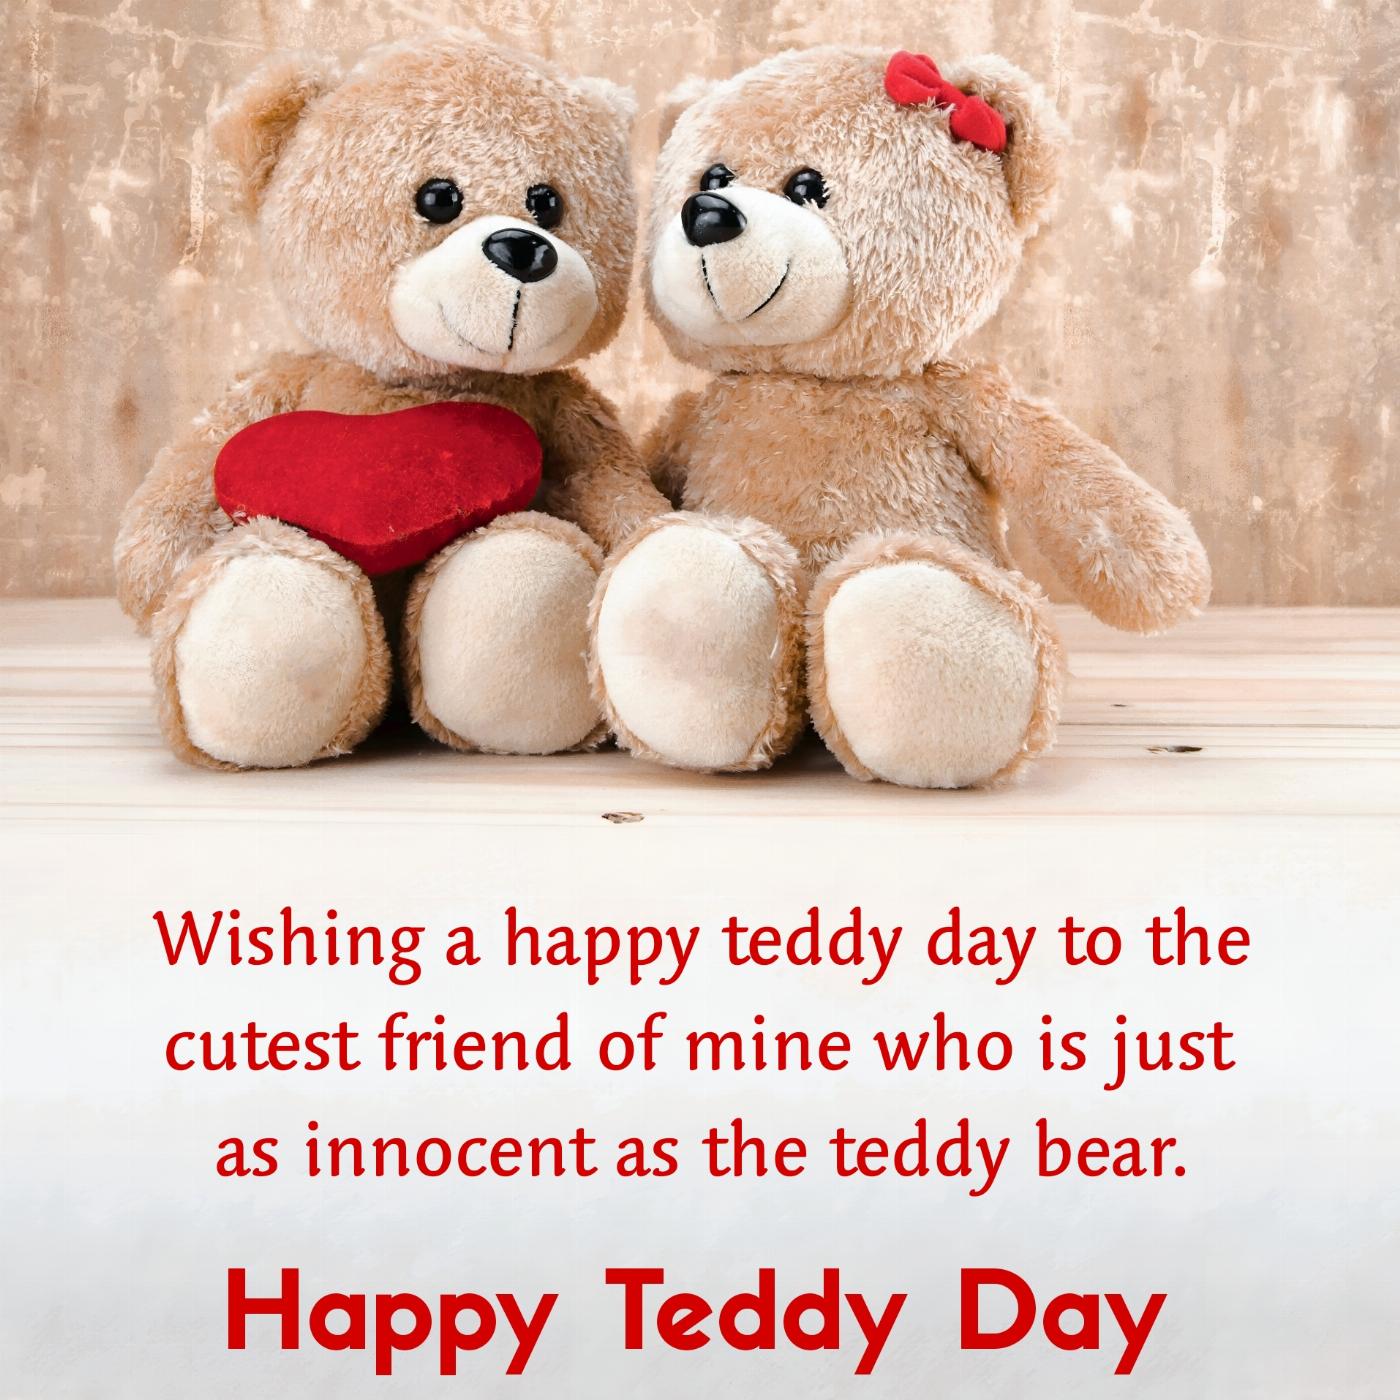 Wishing a happy teddy day to the cutest friend of mine